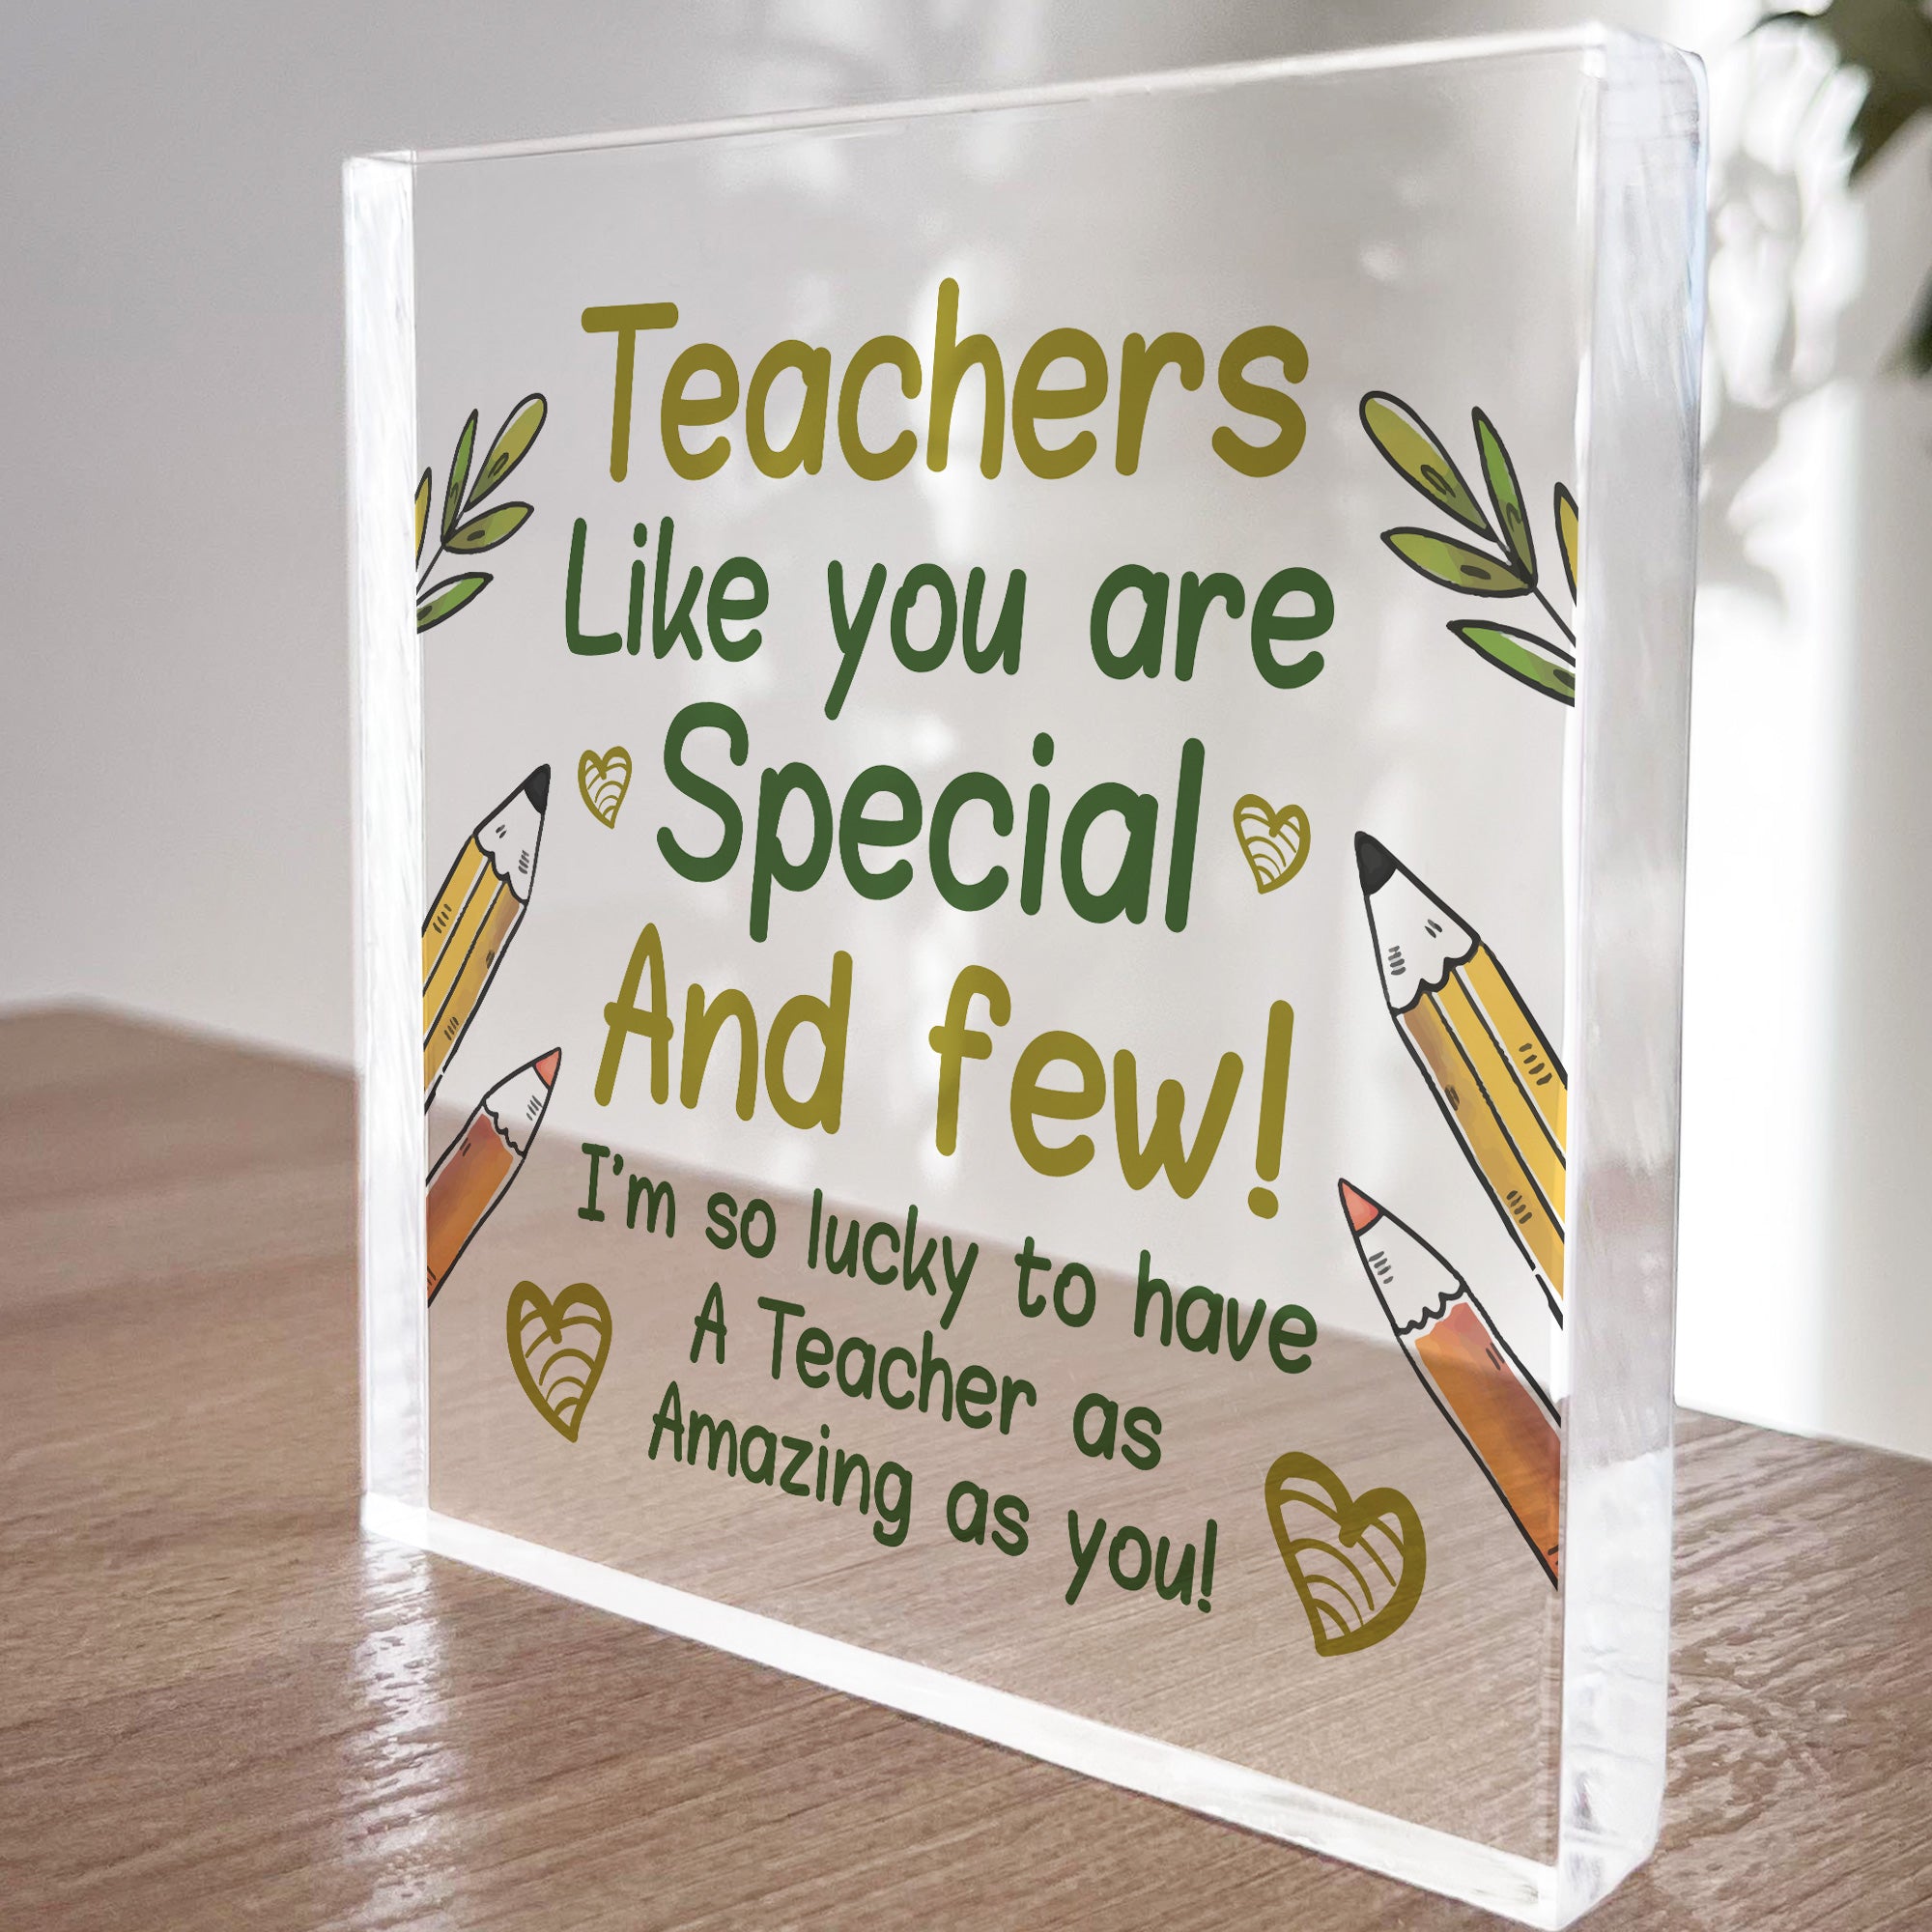 We Will Miss You Booklet: Class gift for teachers who are leaving | Student teacher  gifts, Teacher gifts from class, Student gifts